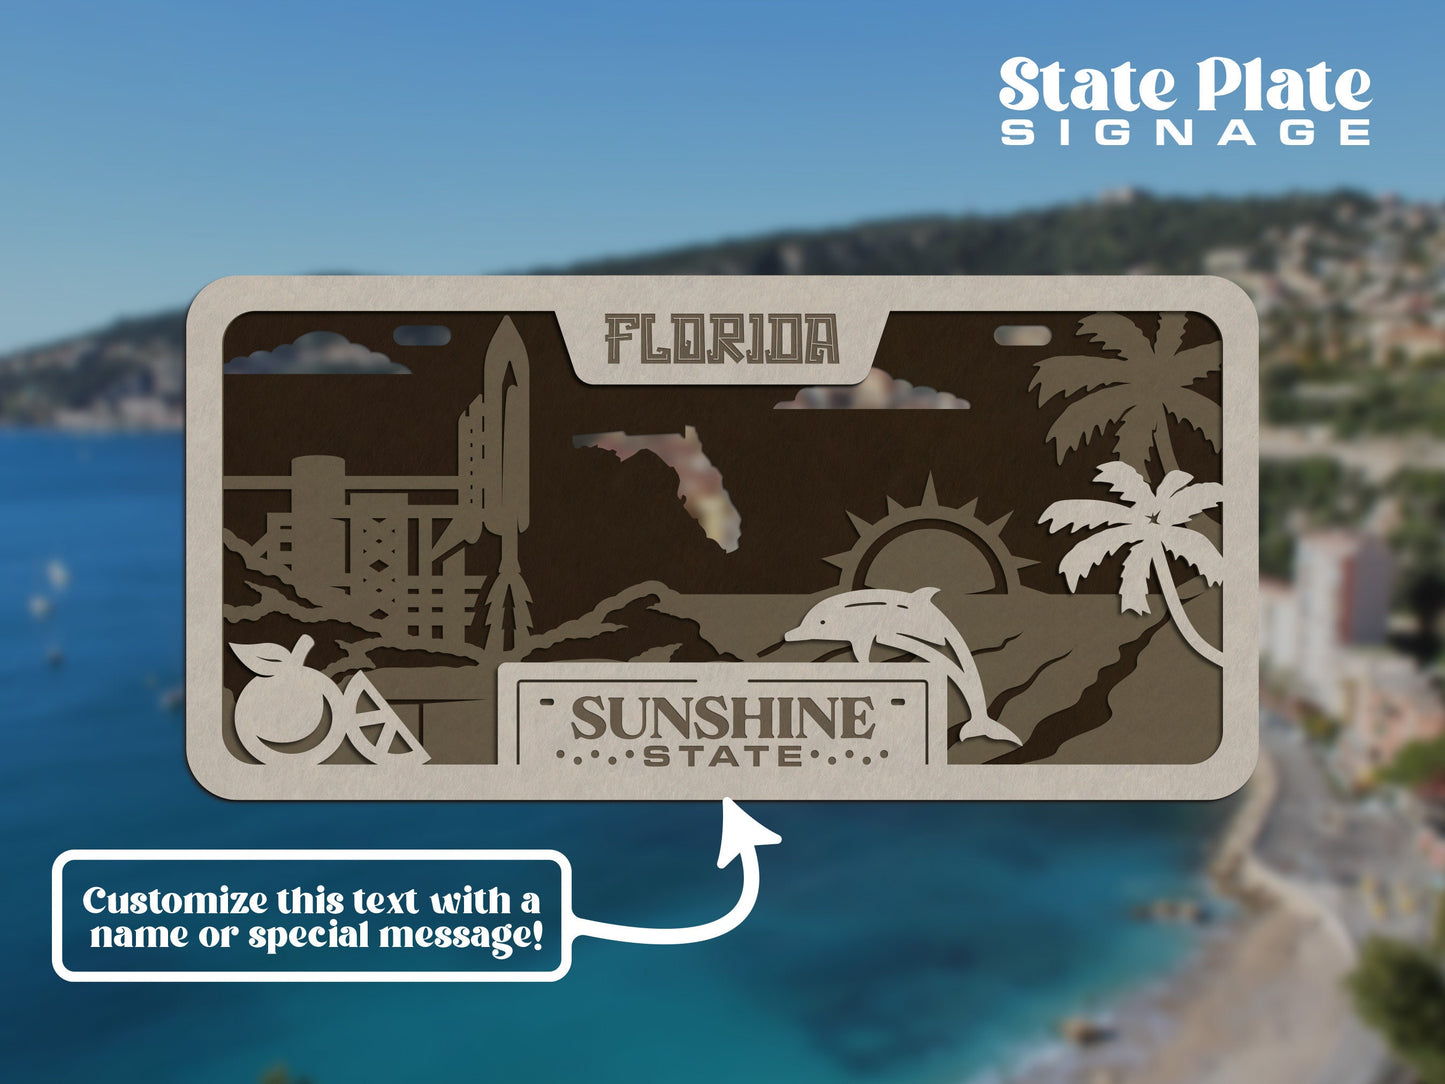 Florida State Plate Ornament and Signage - SVG File Download - Sized for Glowforge - Laser Ready Digital Files